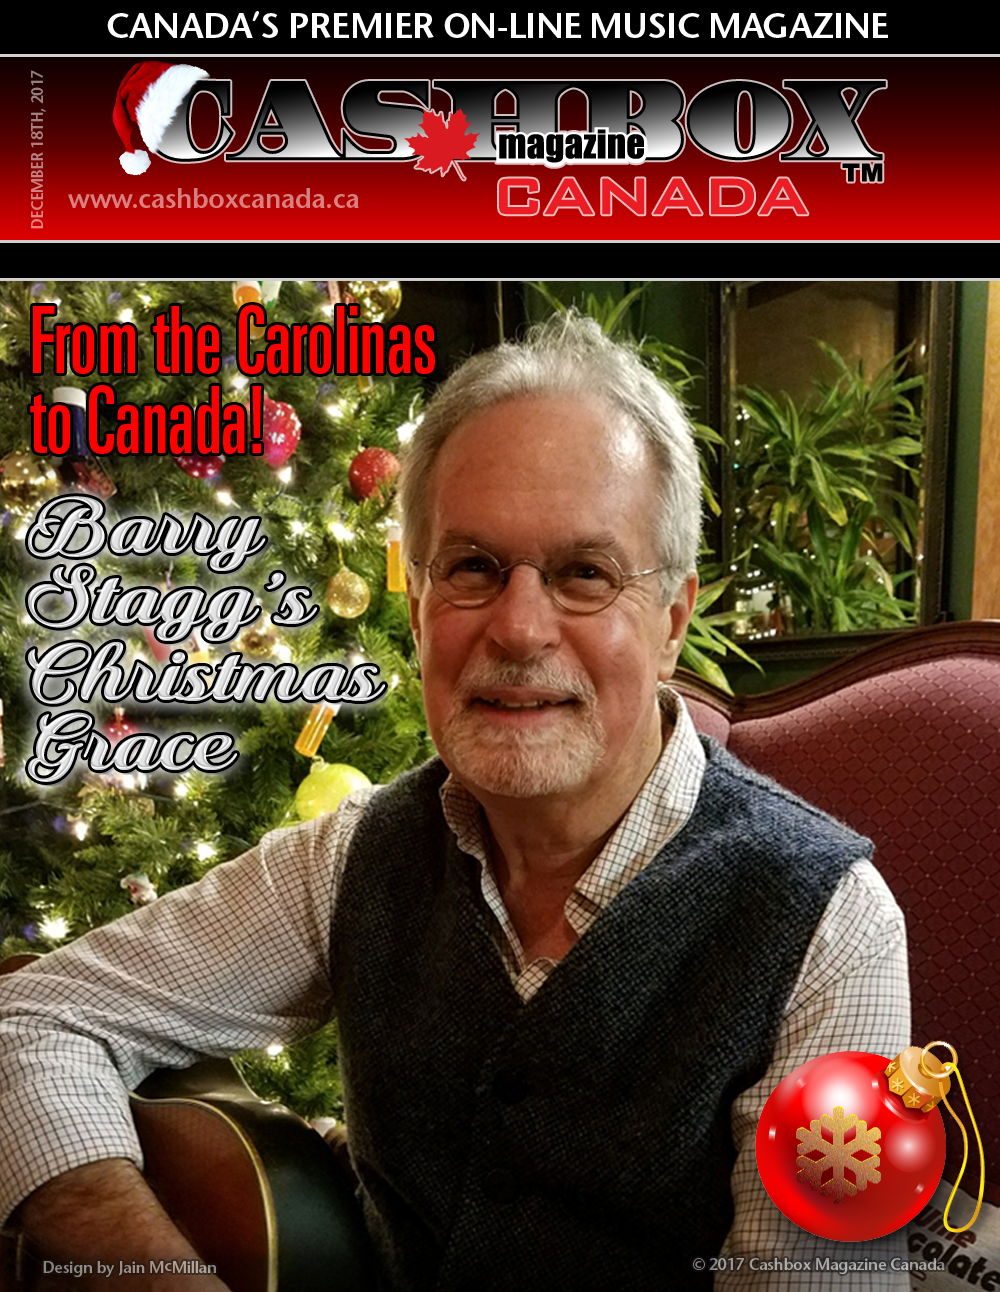 Barry Stagg From the Carolinas to Canada Barry Stagg’s Christmas Grace!